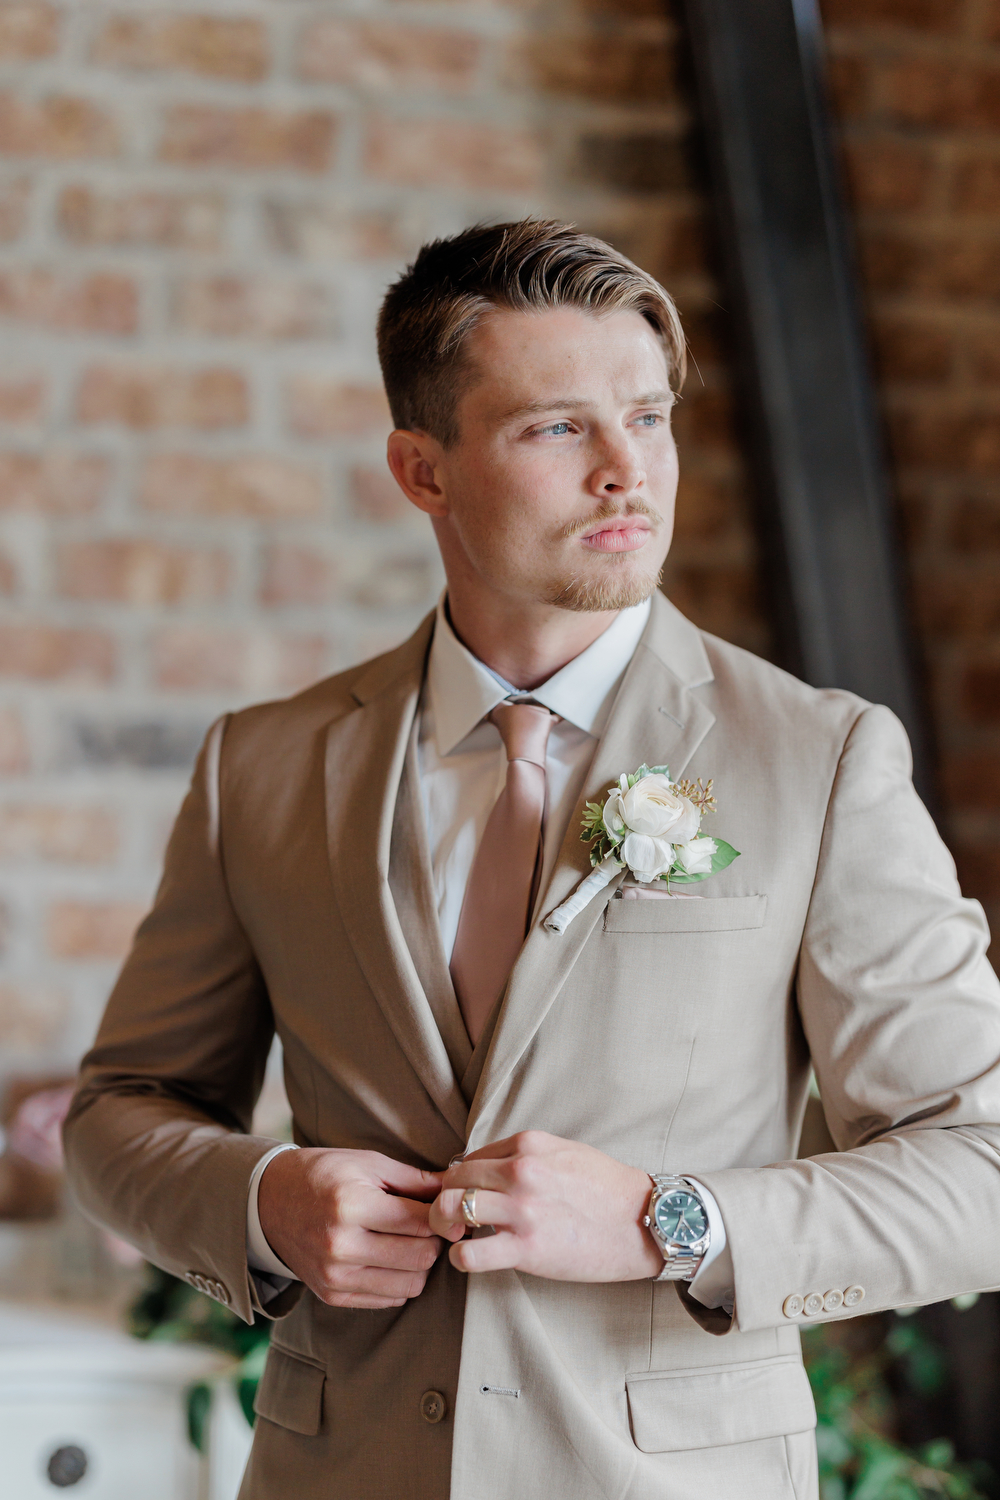 A man buttons up his tan suit jacket with a traditional suit fit